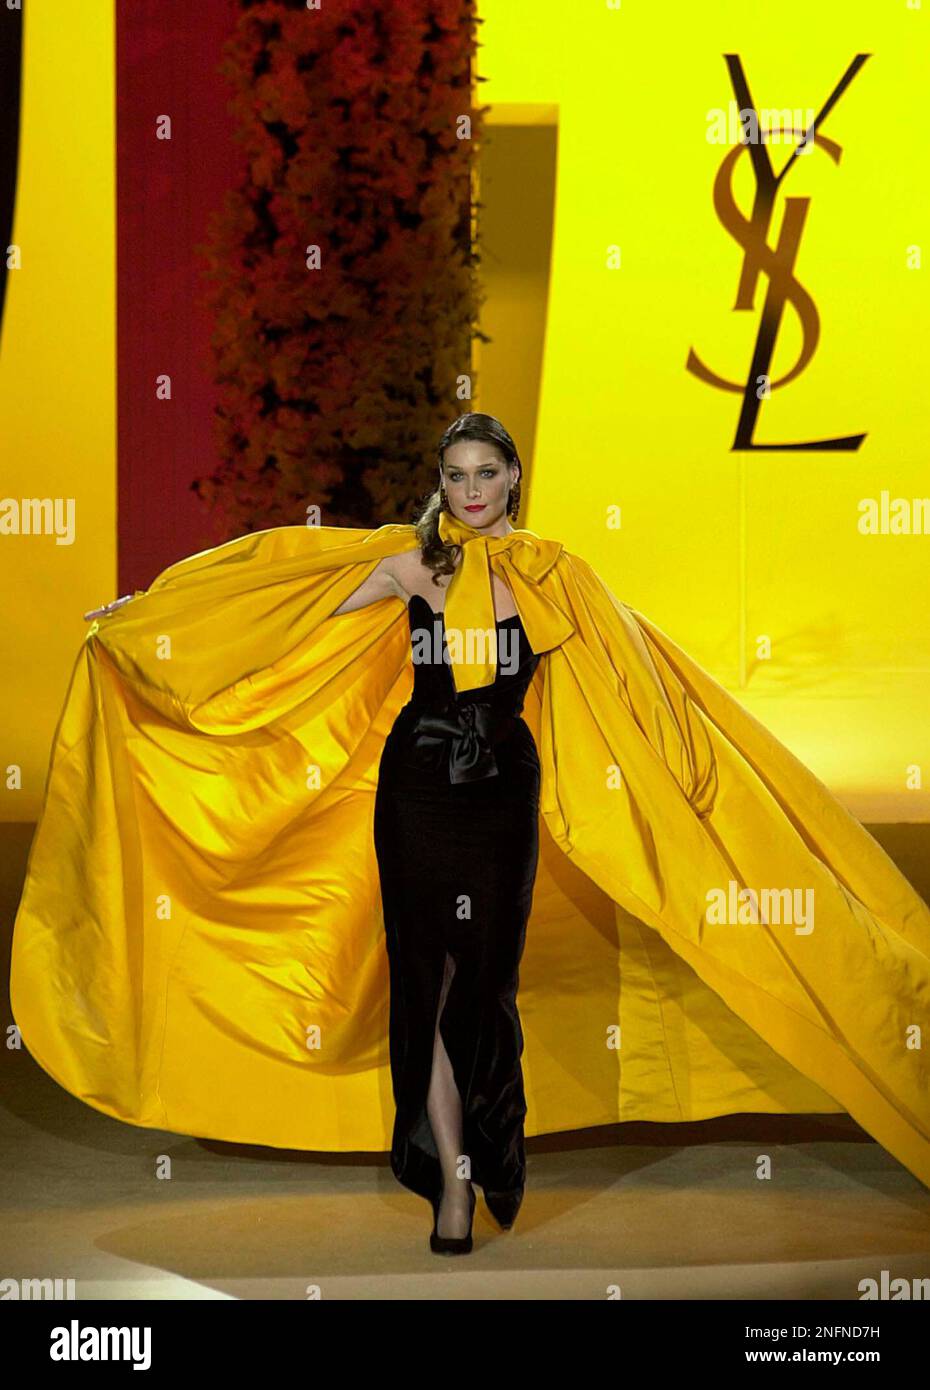 FILE** This Jan. 22, 2002 file photo shows model Carla Bruni as she opens a  long yellow cape to show off a fitted black dress during French legendary  fashion designer Yves Saint